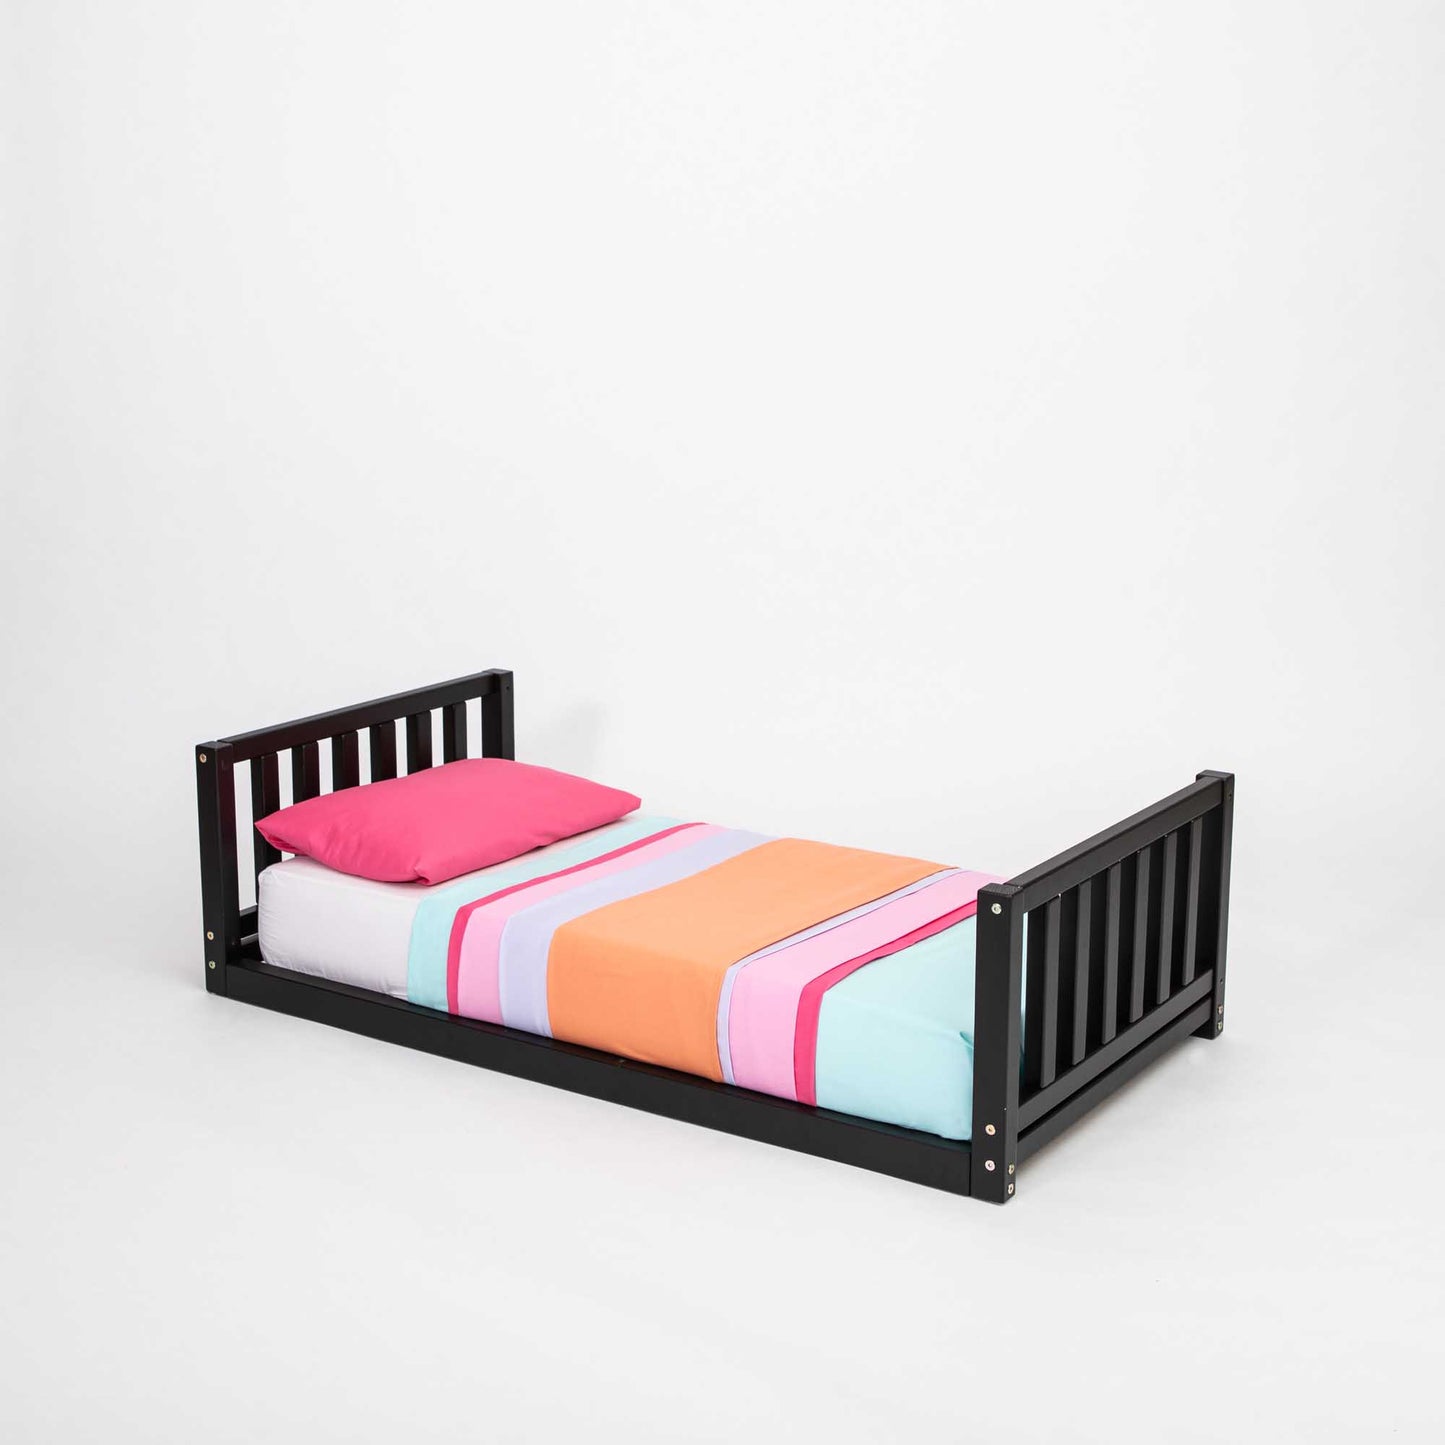 A 2-in-1 kid's bed on legs with a vertical rail headboard and footboard, with a colorful bed sheet.